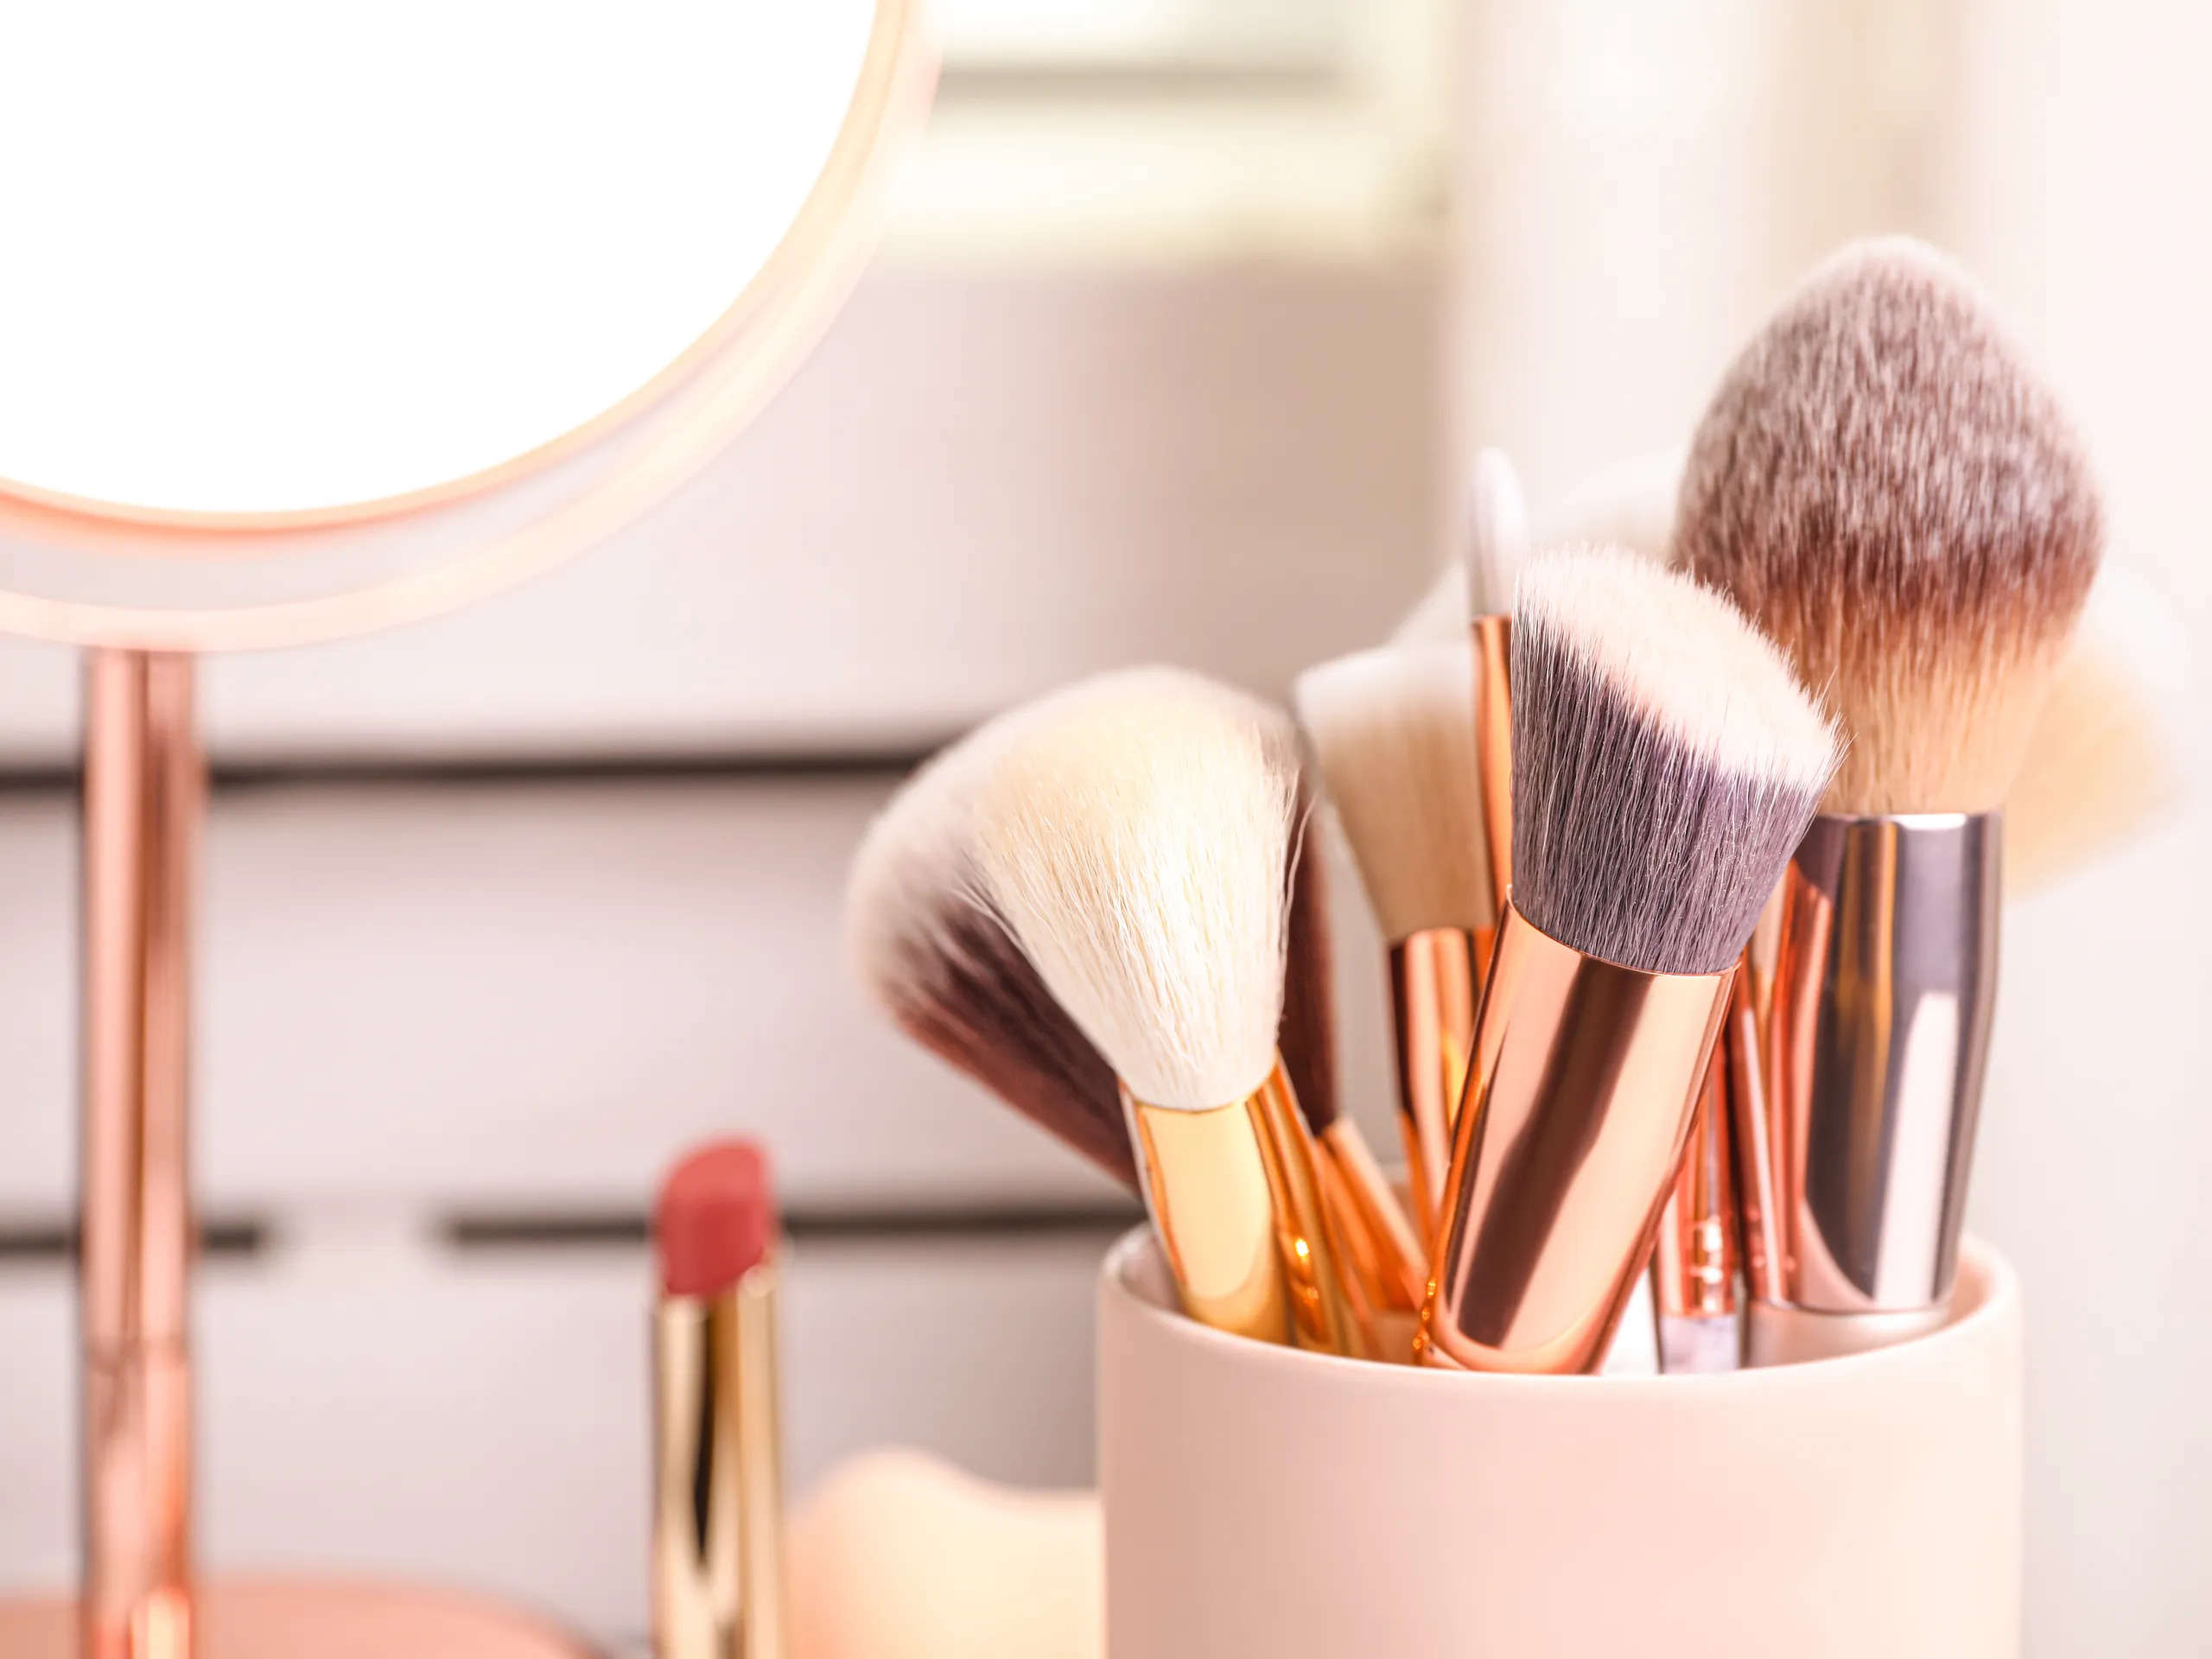 brush: makeup brushes for a flawless look Economic Times